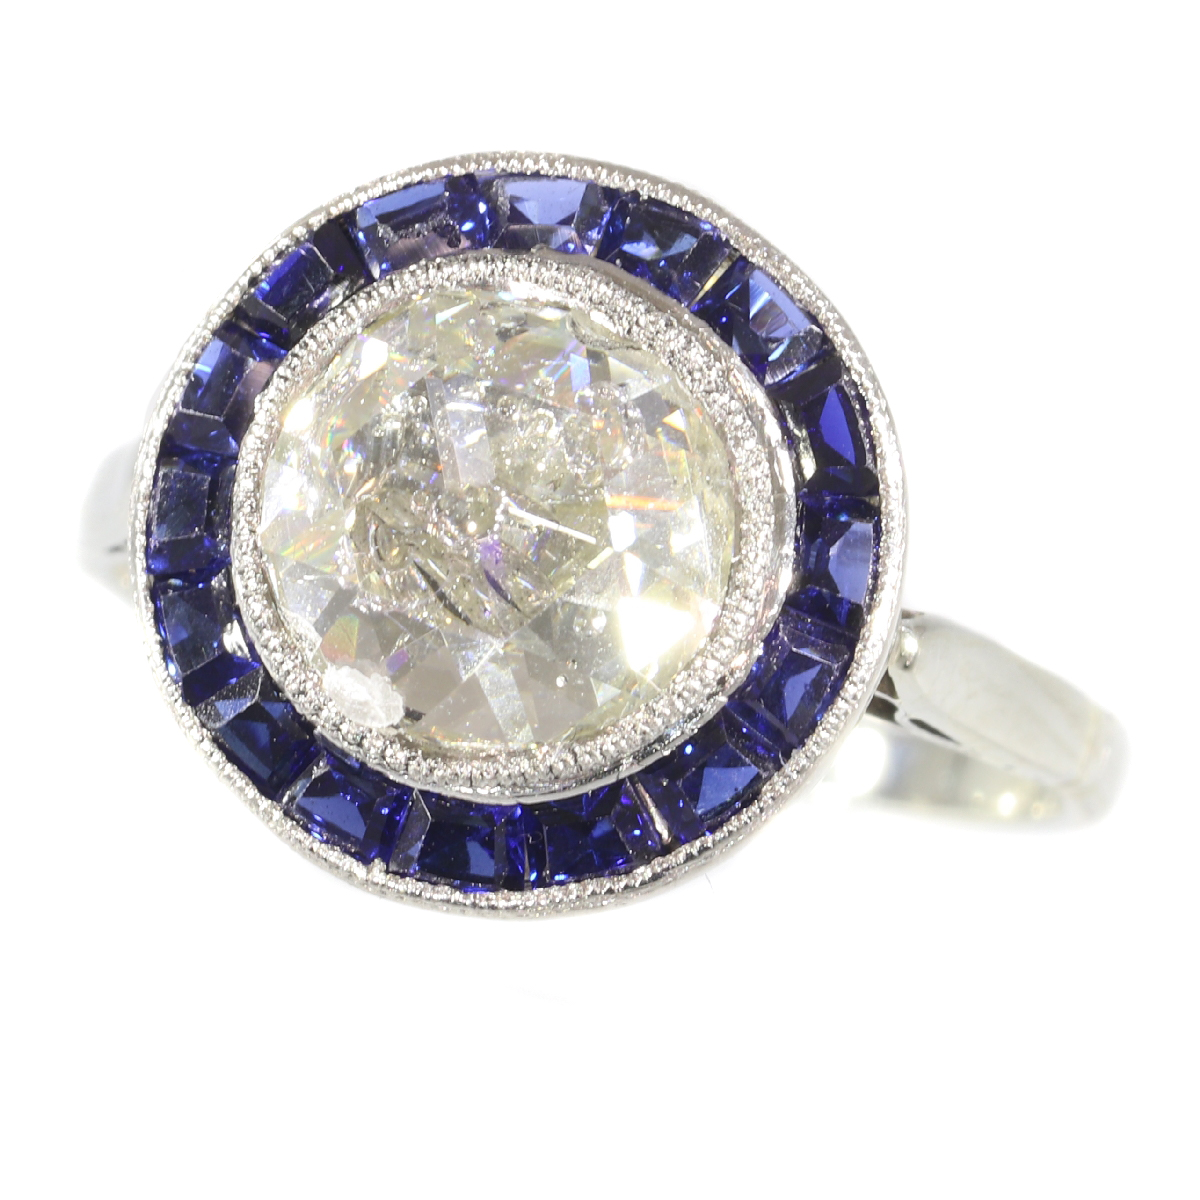 Vintage Art Deco diamond and sapphire engagement ring with big rose cut diamond